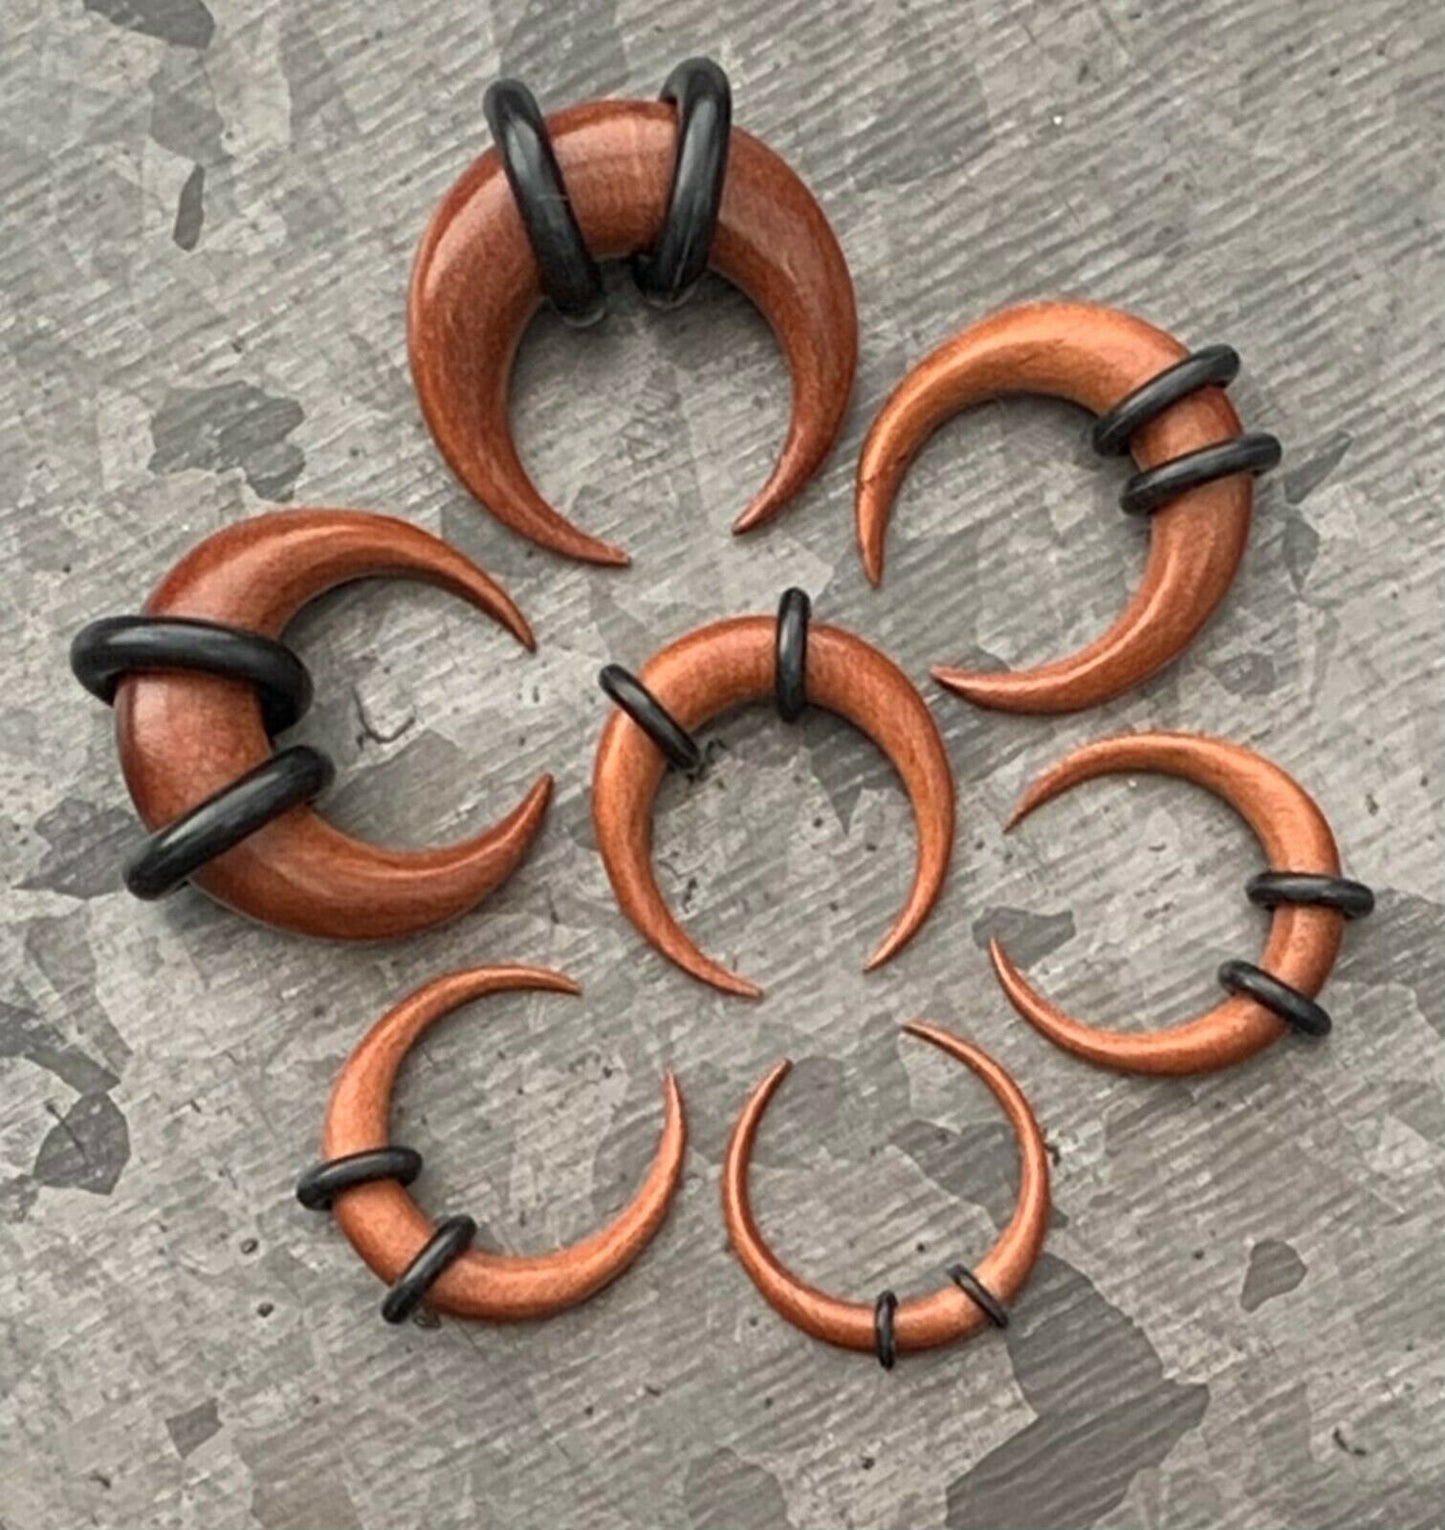 PAIR of Organic Sawo Wood Buffalo Tapers / Plugs with O-Rings - Expanders - Gauges 8g (3mm) thru 0g (